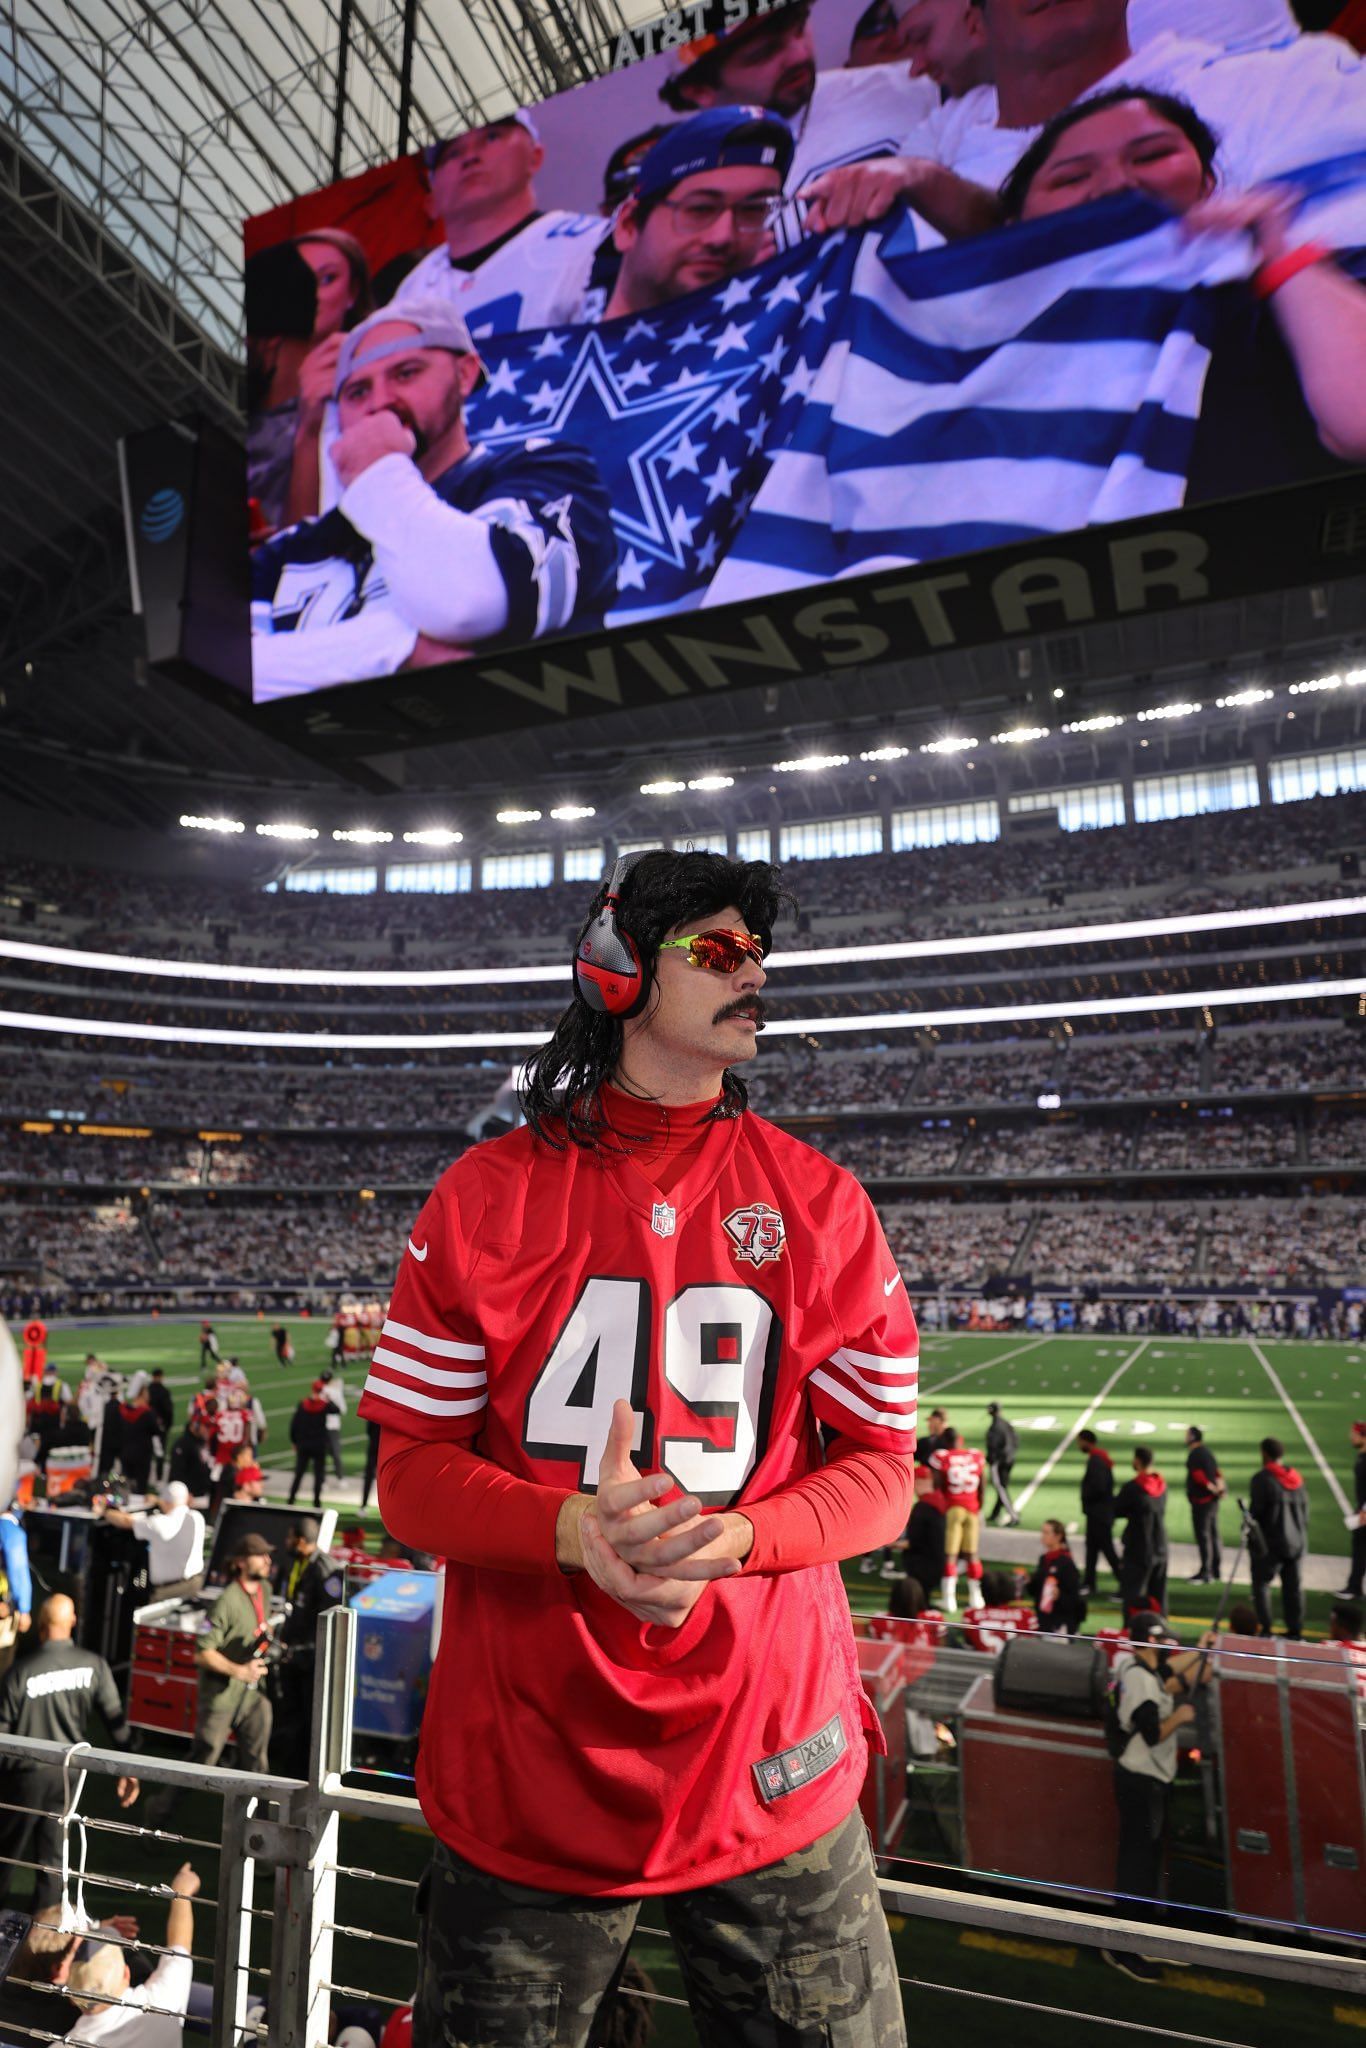 Dr. Disrepect poses at the 49ers/Cowboys game - Credit: @DrDisrespect on Twitter